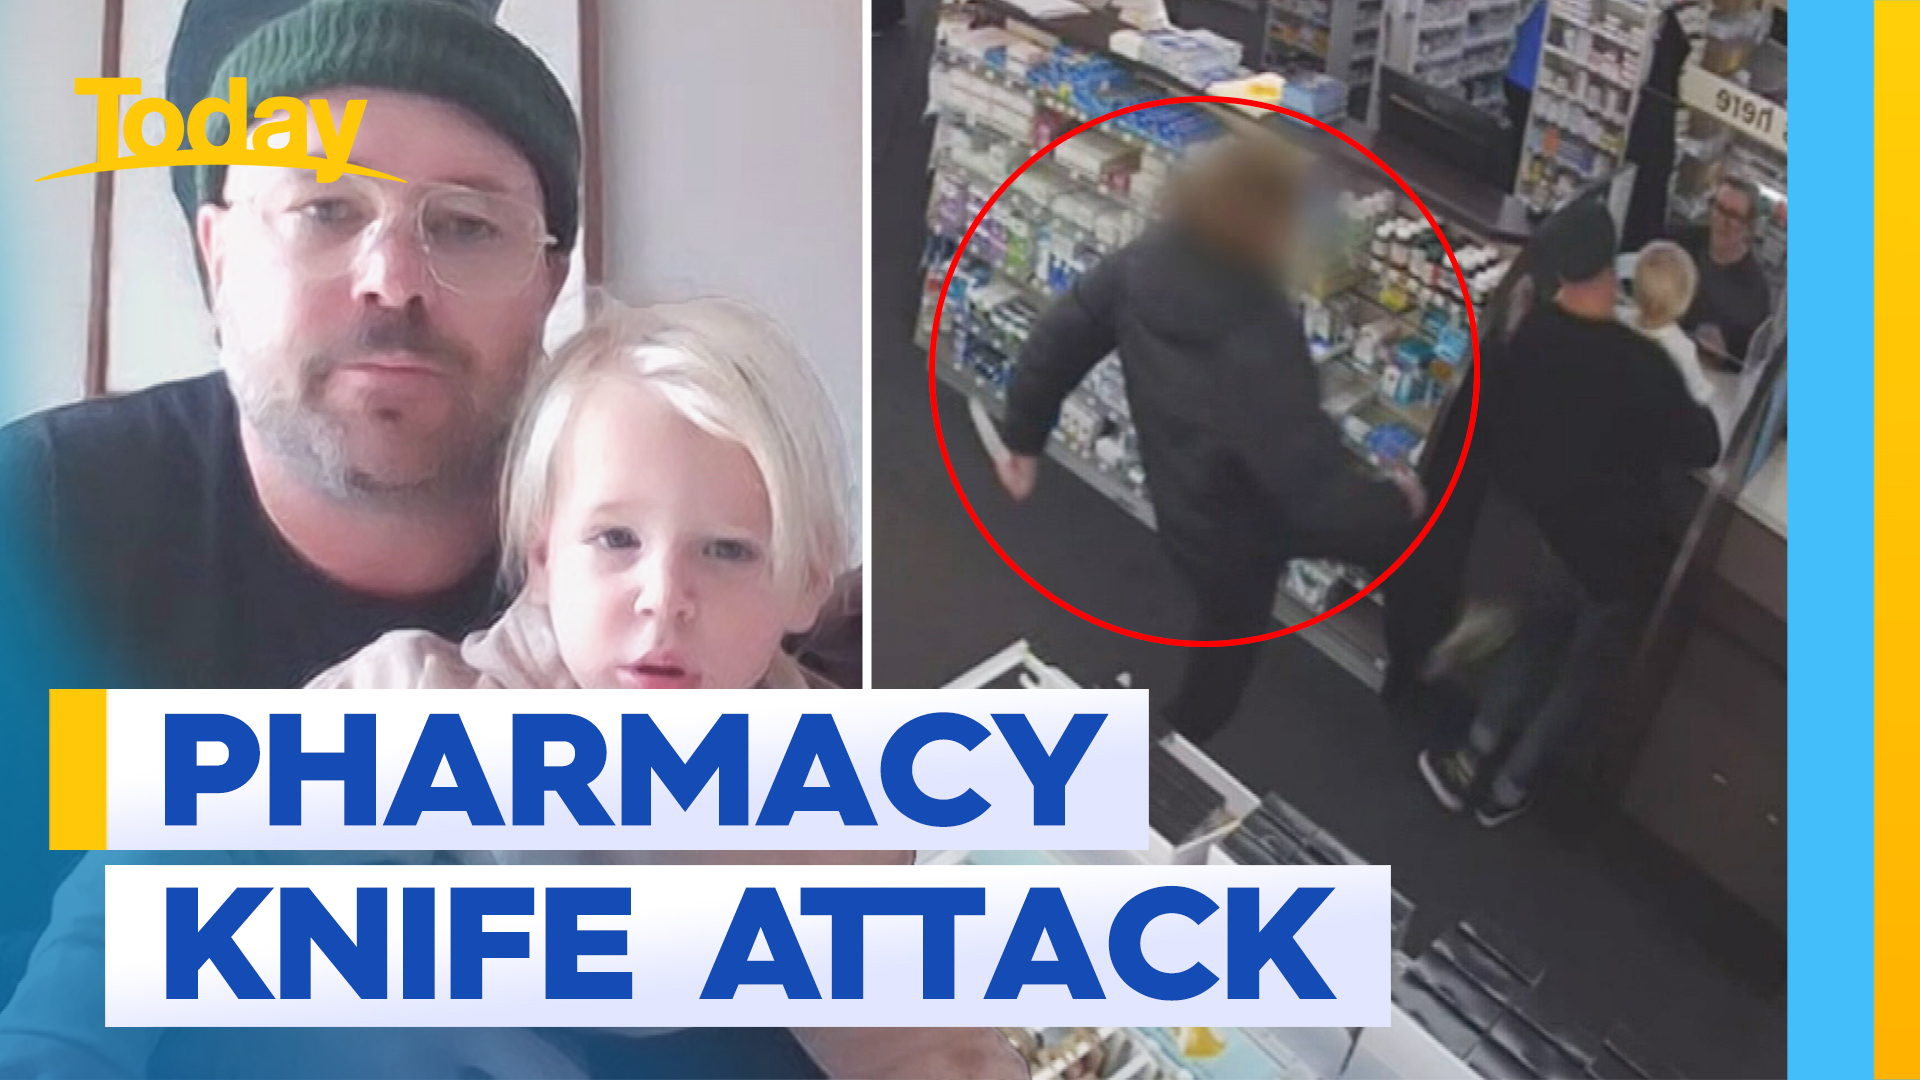 Father and 19-month-old allegedly targeted in pharmacy knife attack